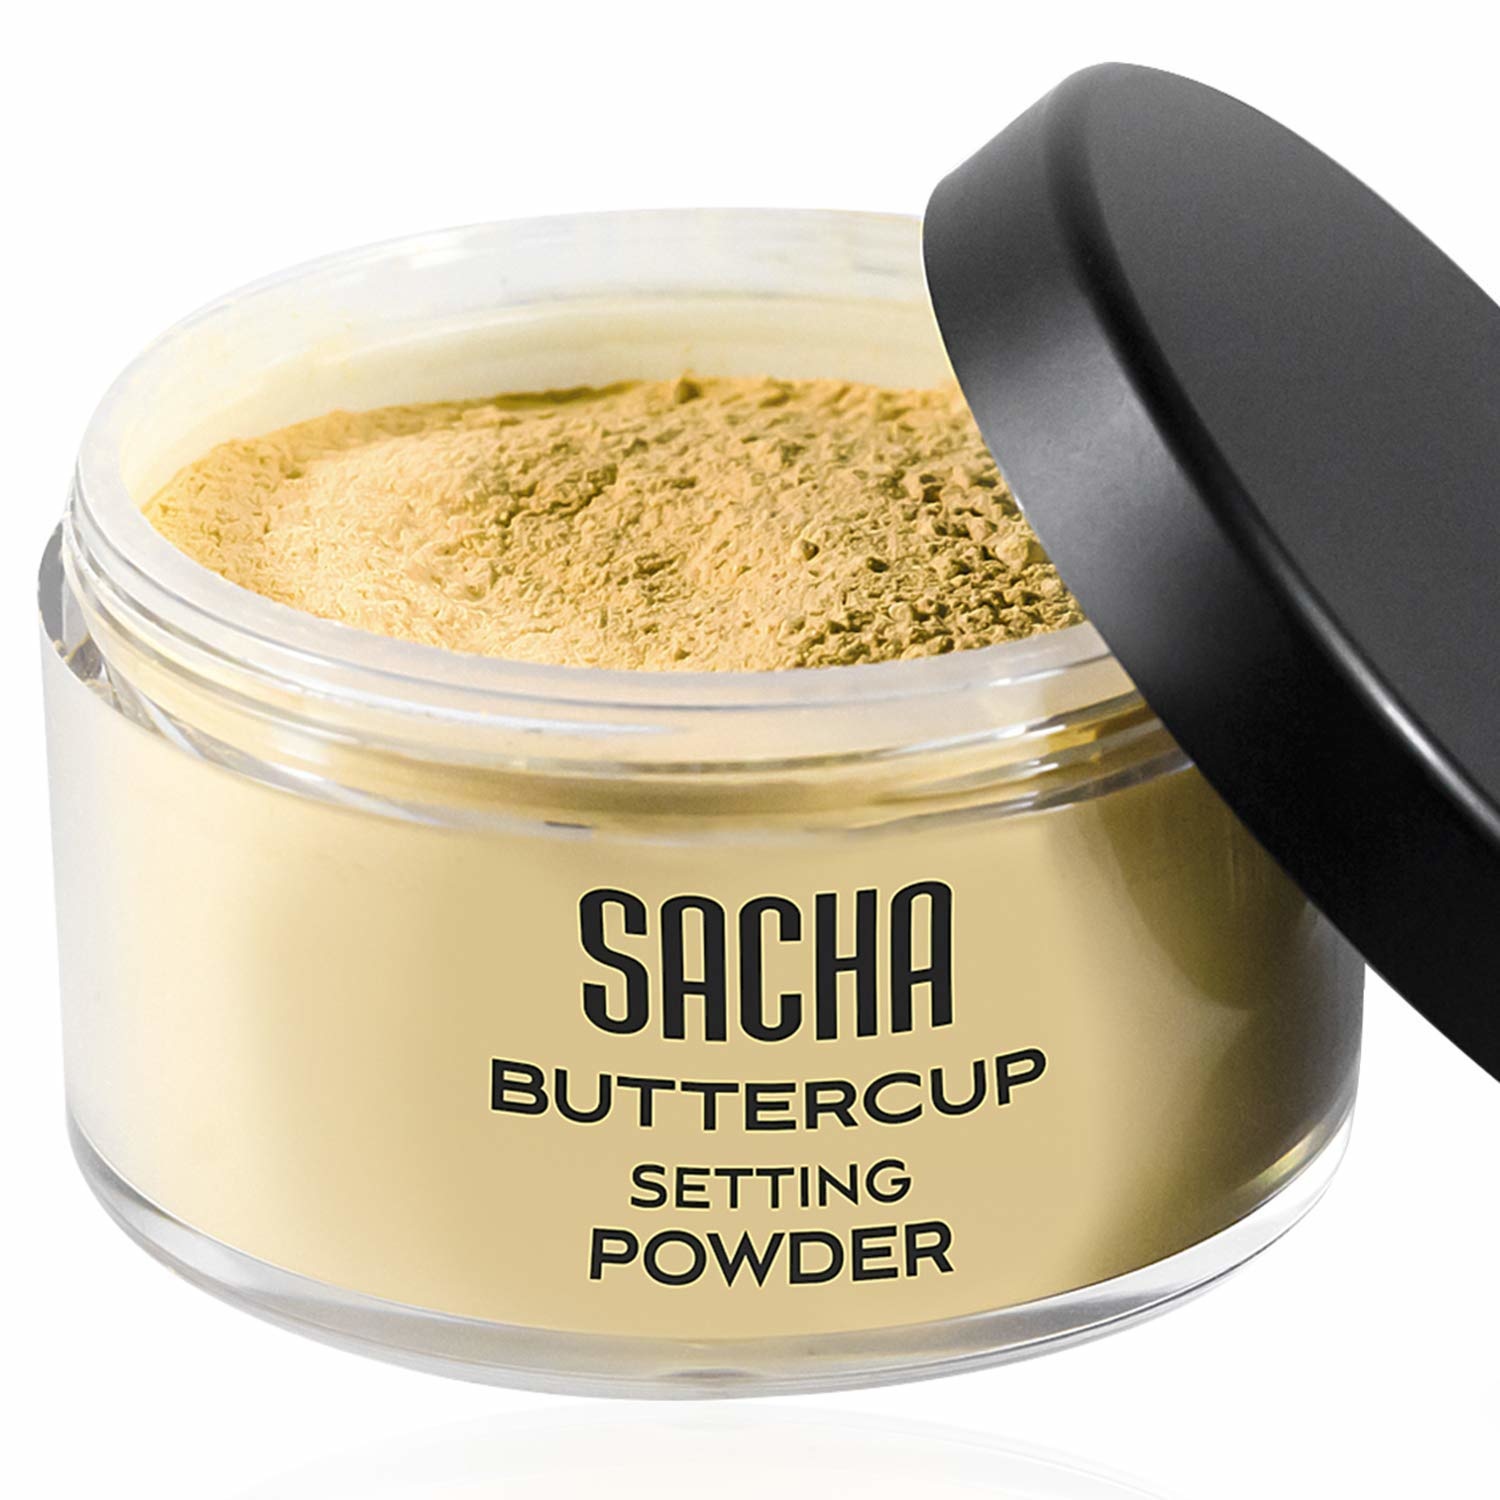 sacha buttercup powder in stores near me